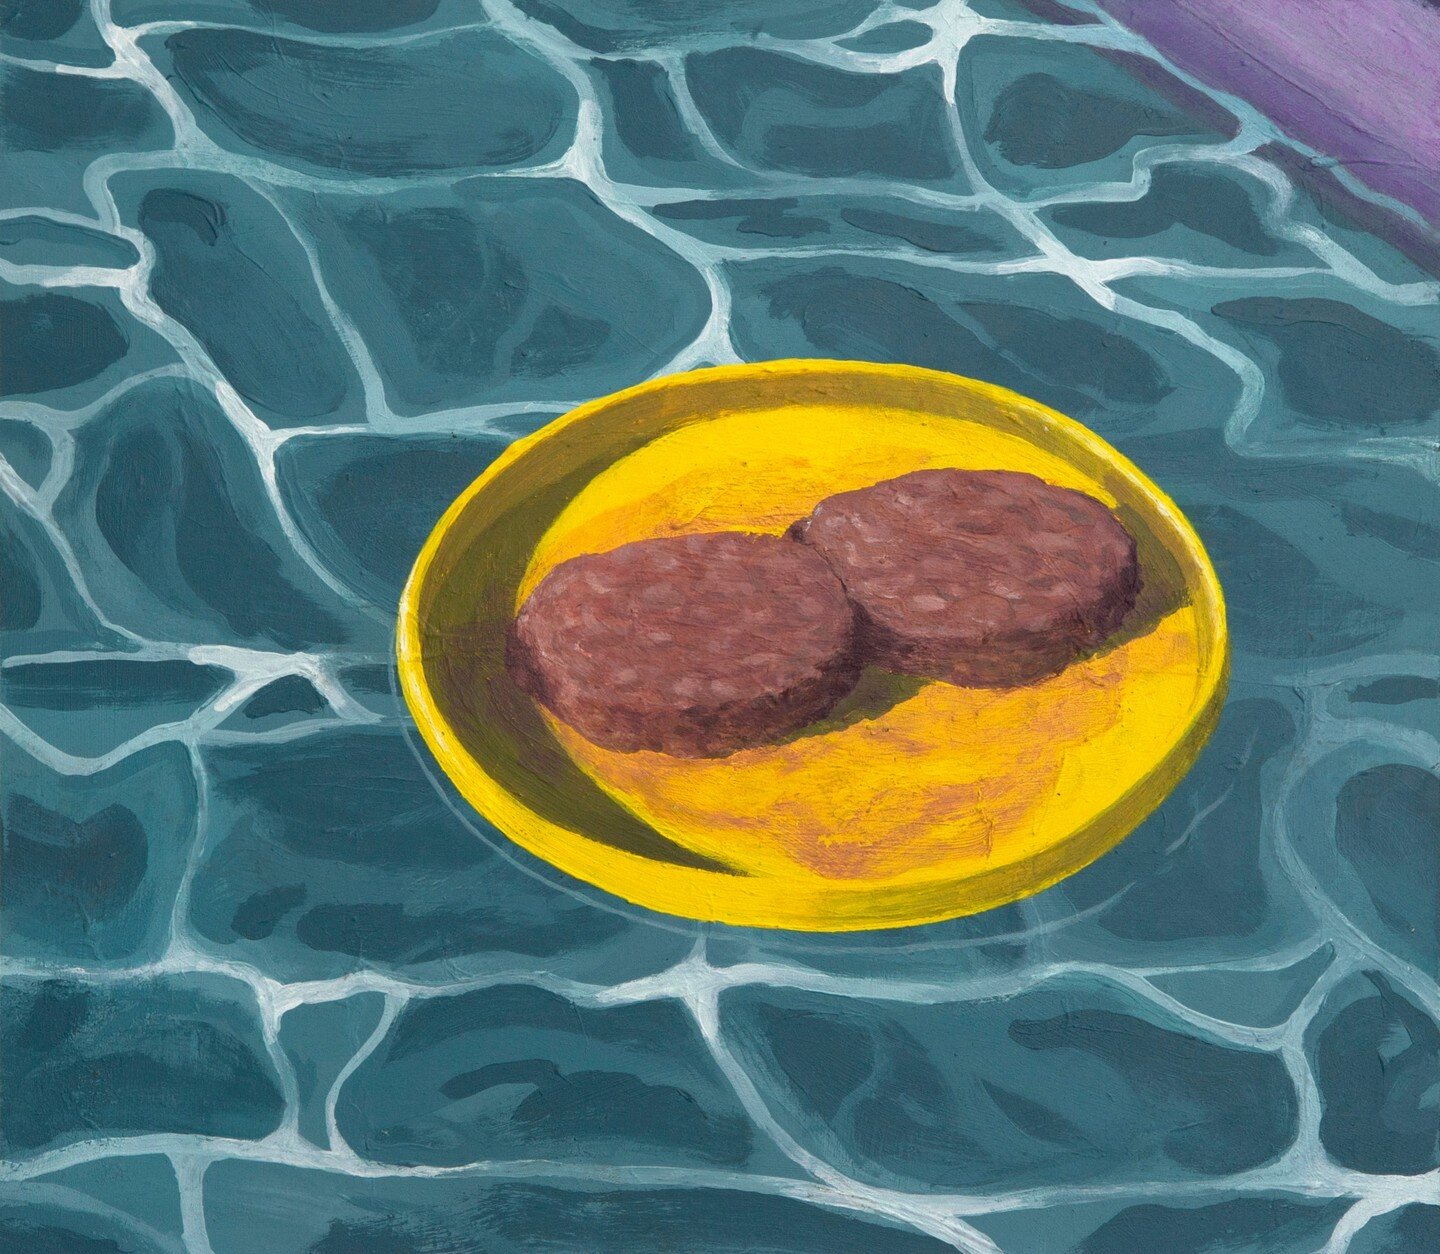 &quot;A frisbee, two patties and a pool noodle&quot;, 2018
33cm x 29cm
Acrylic on wood

⚡ DM FOR PRINTS ⚡

Pro tip: Frisbees are a great thing to bring on a roadtrip. Use yours for sport, as a cutting board, as a plate or a fan to cool you down or to